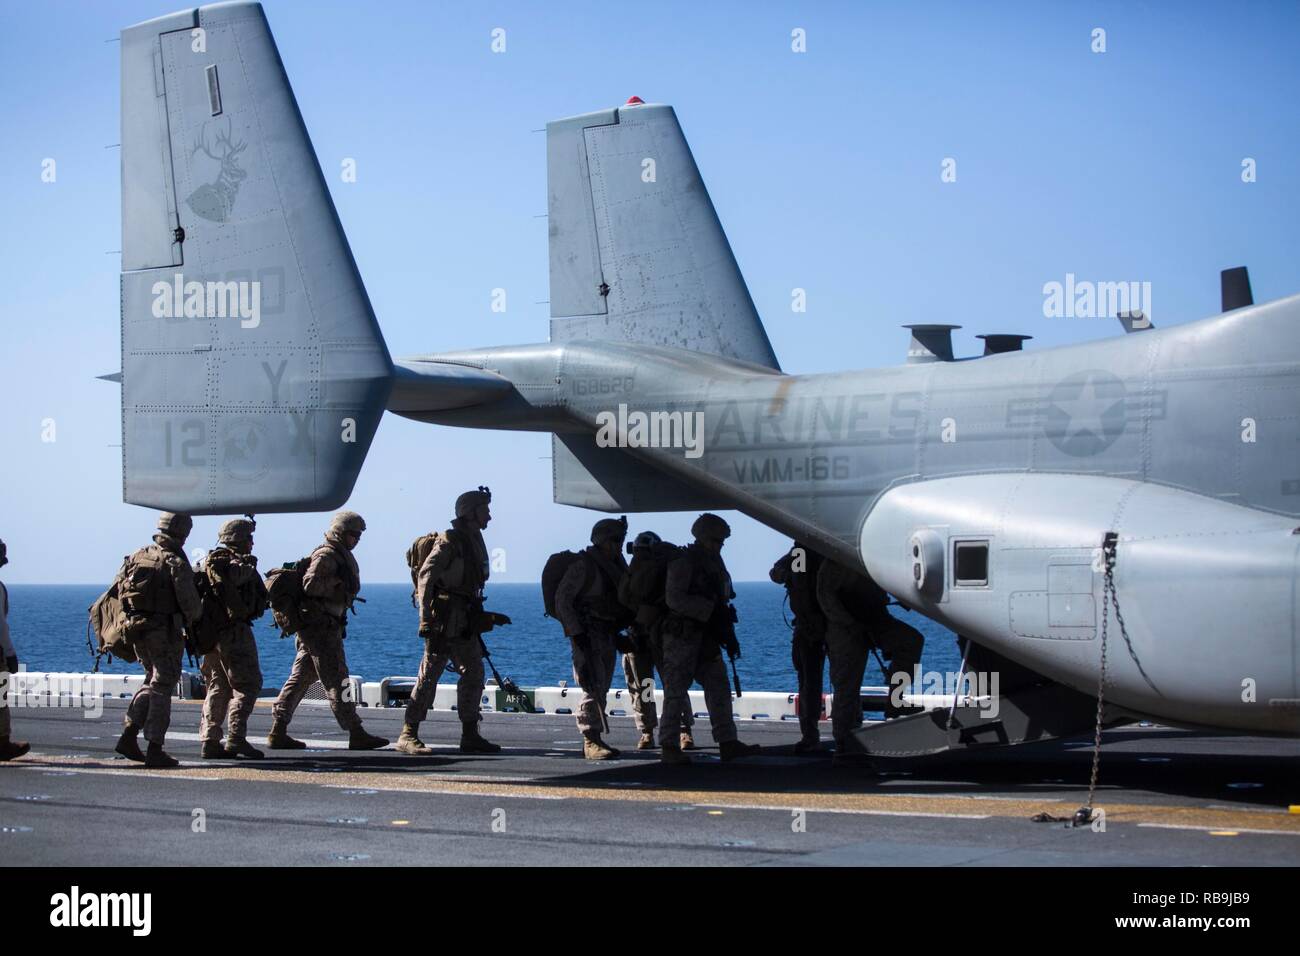 ARABIAN SEA – U.S. Marines with Lima Company, Battalion Landing Team 3/1, 13th Marine Expeditionary Unit (MEU), enter an MV-22B Osprey for a sparrow hawk training exercise aboard the Wasp-class amphibious assault ship USS Essex (LHD 2), Jan. 6, 2019. The Essex is the flagship for the Essex Amphibious Ready Group and, with the embarked 13th MEU, is deployed to the U.S. 5th Fleet area of operations in support of naval operations to ensure maritime stability in the Central Region, connecting the Mediterranean and the Pacific through the western Indian Ocean and three strategic choke points. (U.S. Stock Photo